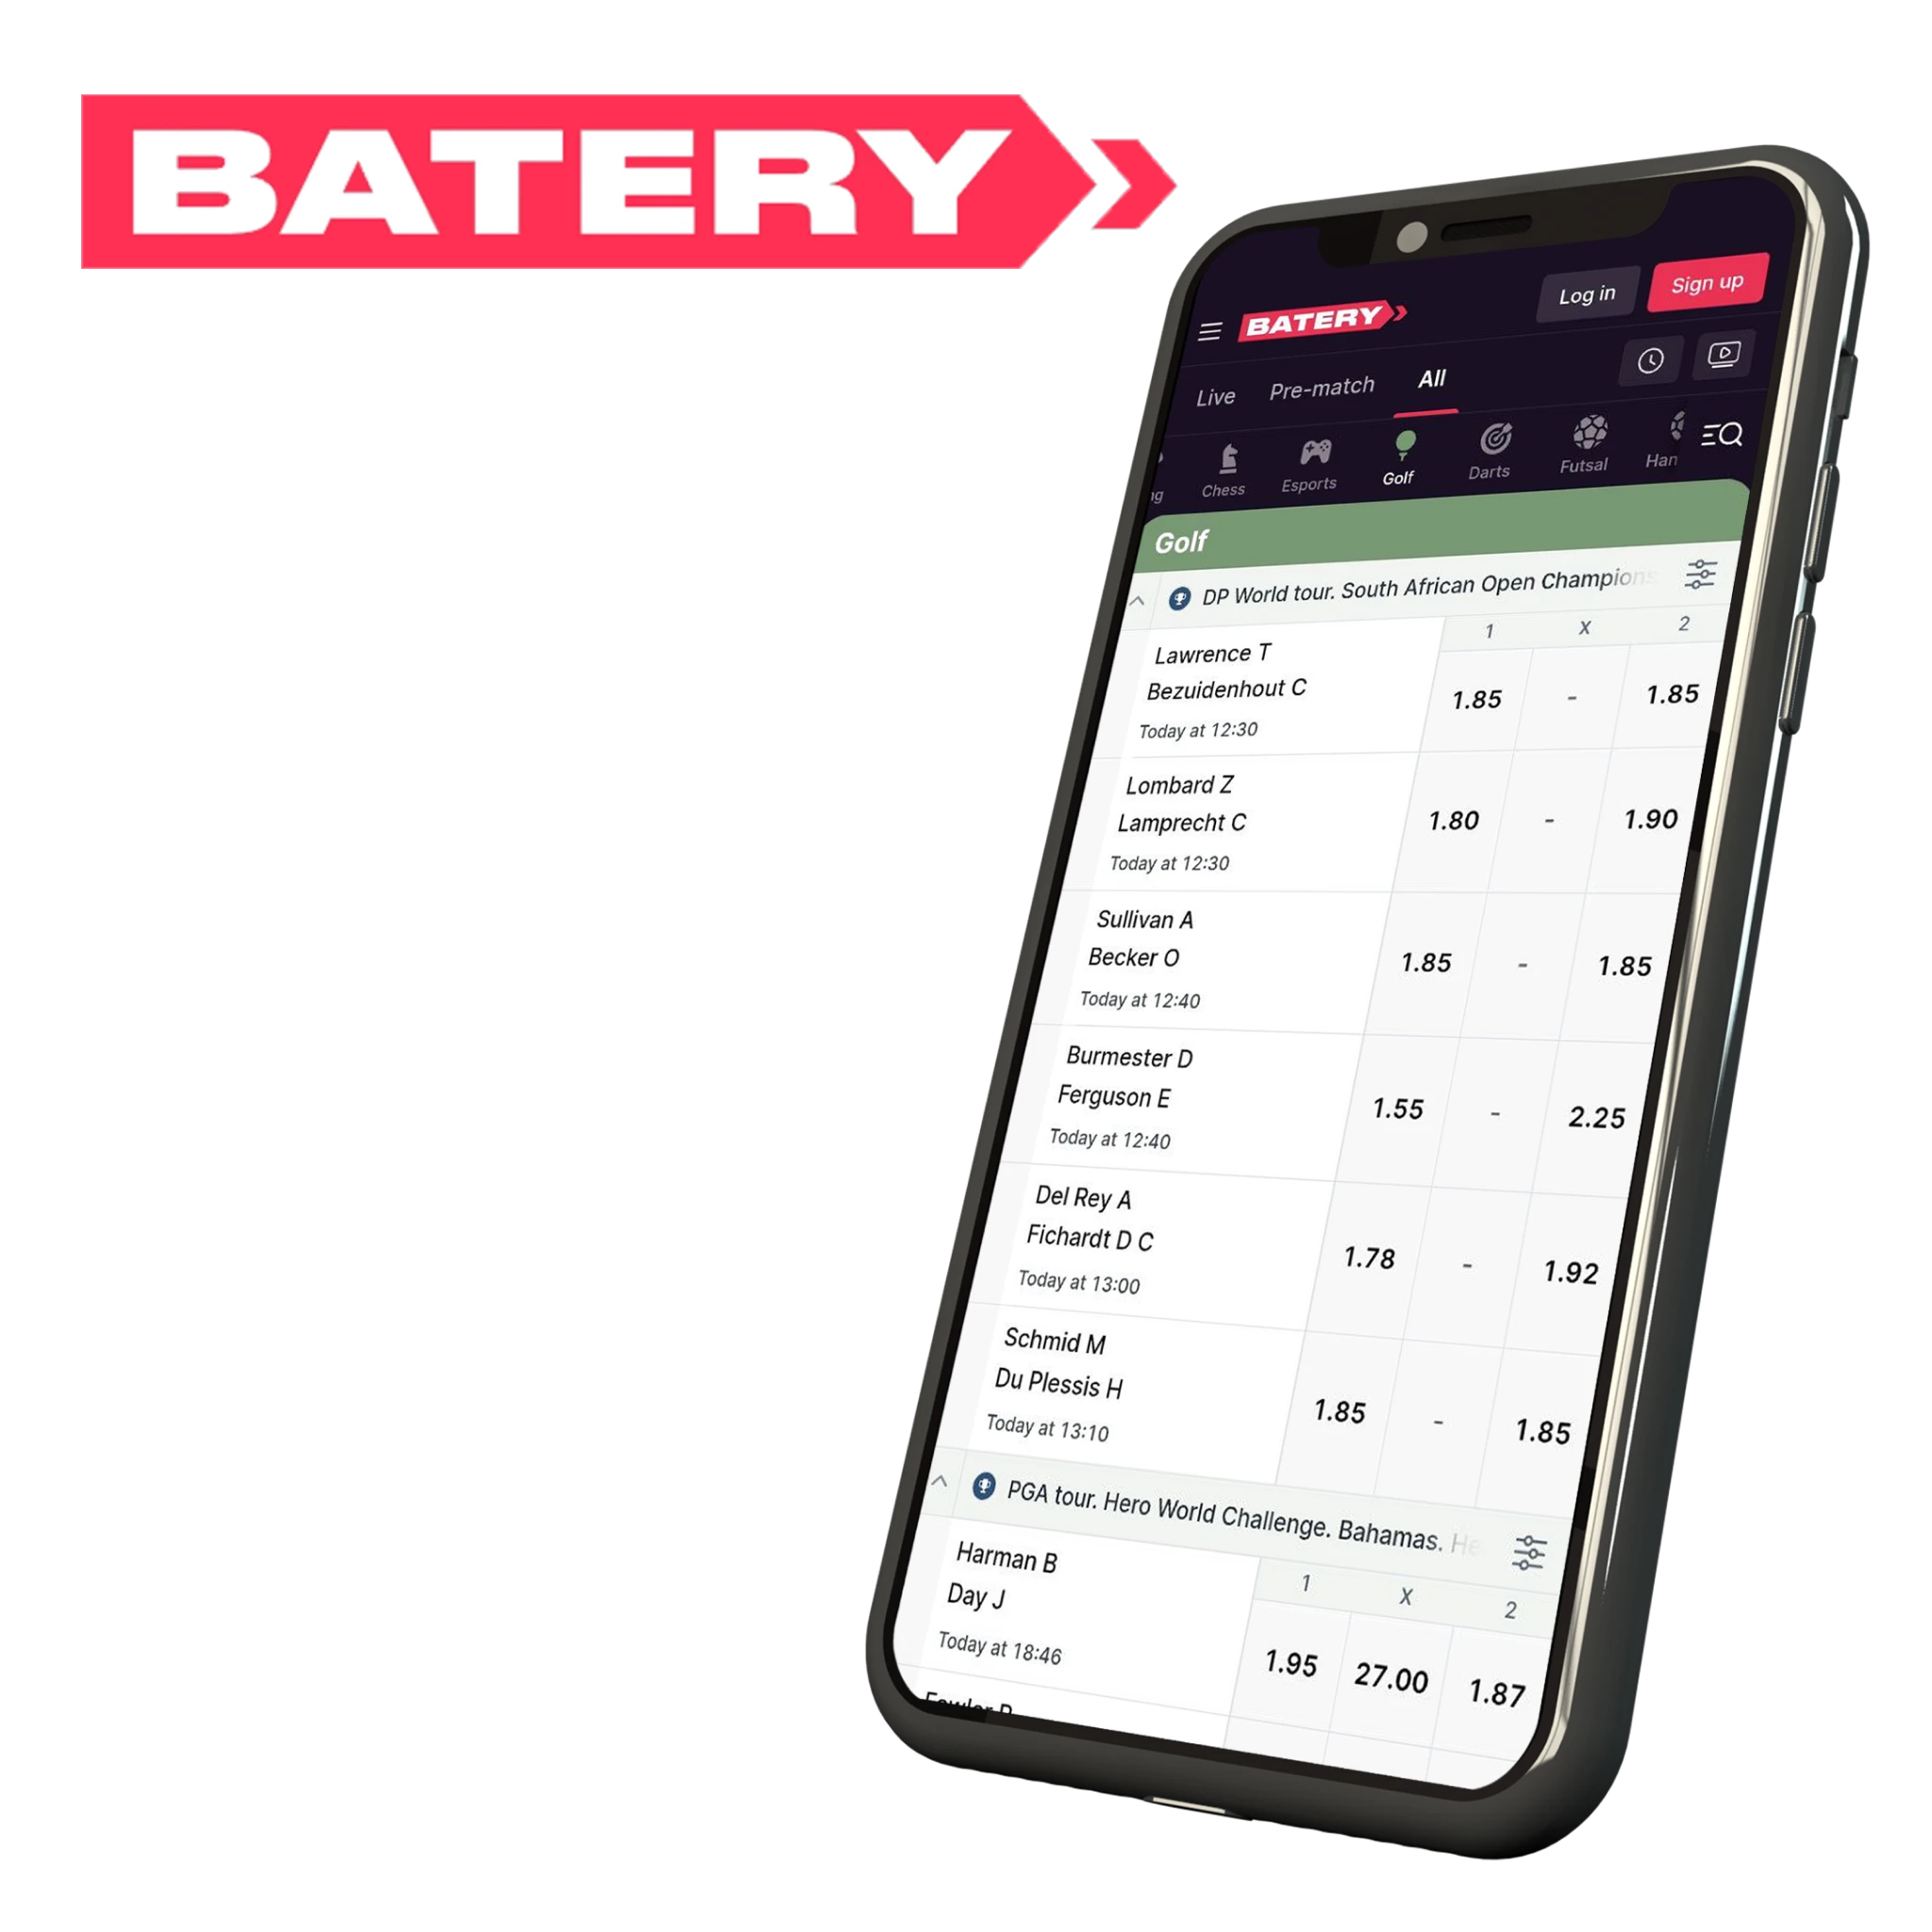 Batery app has many advantages for online golf betting.